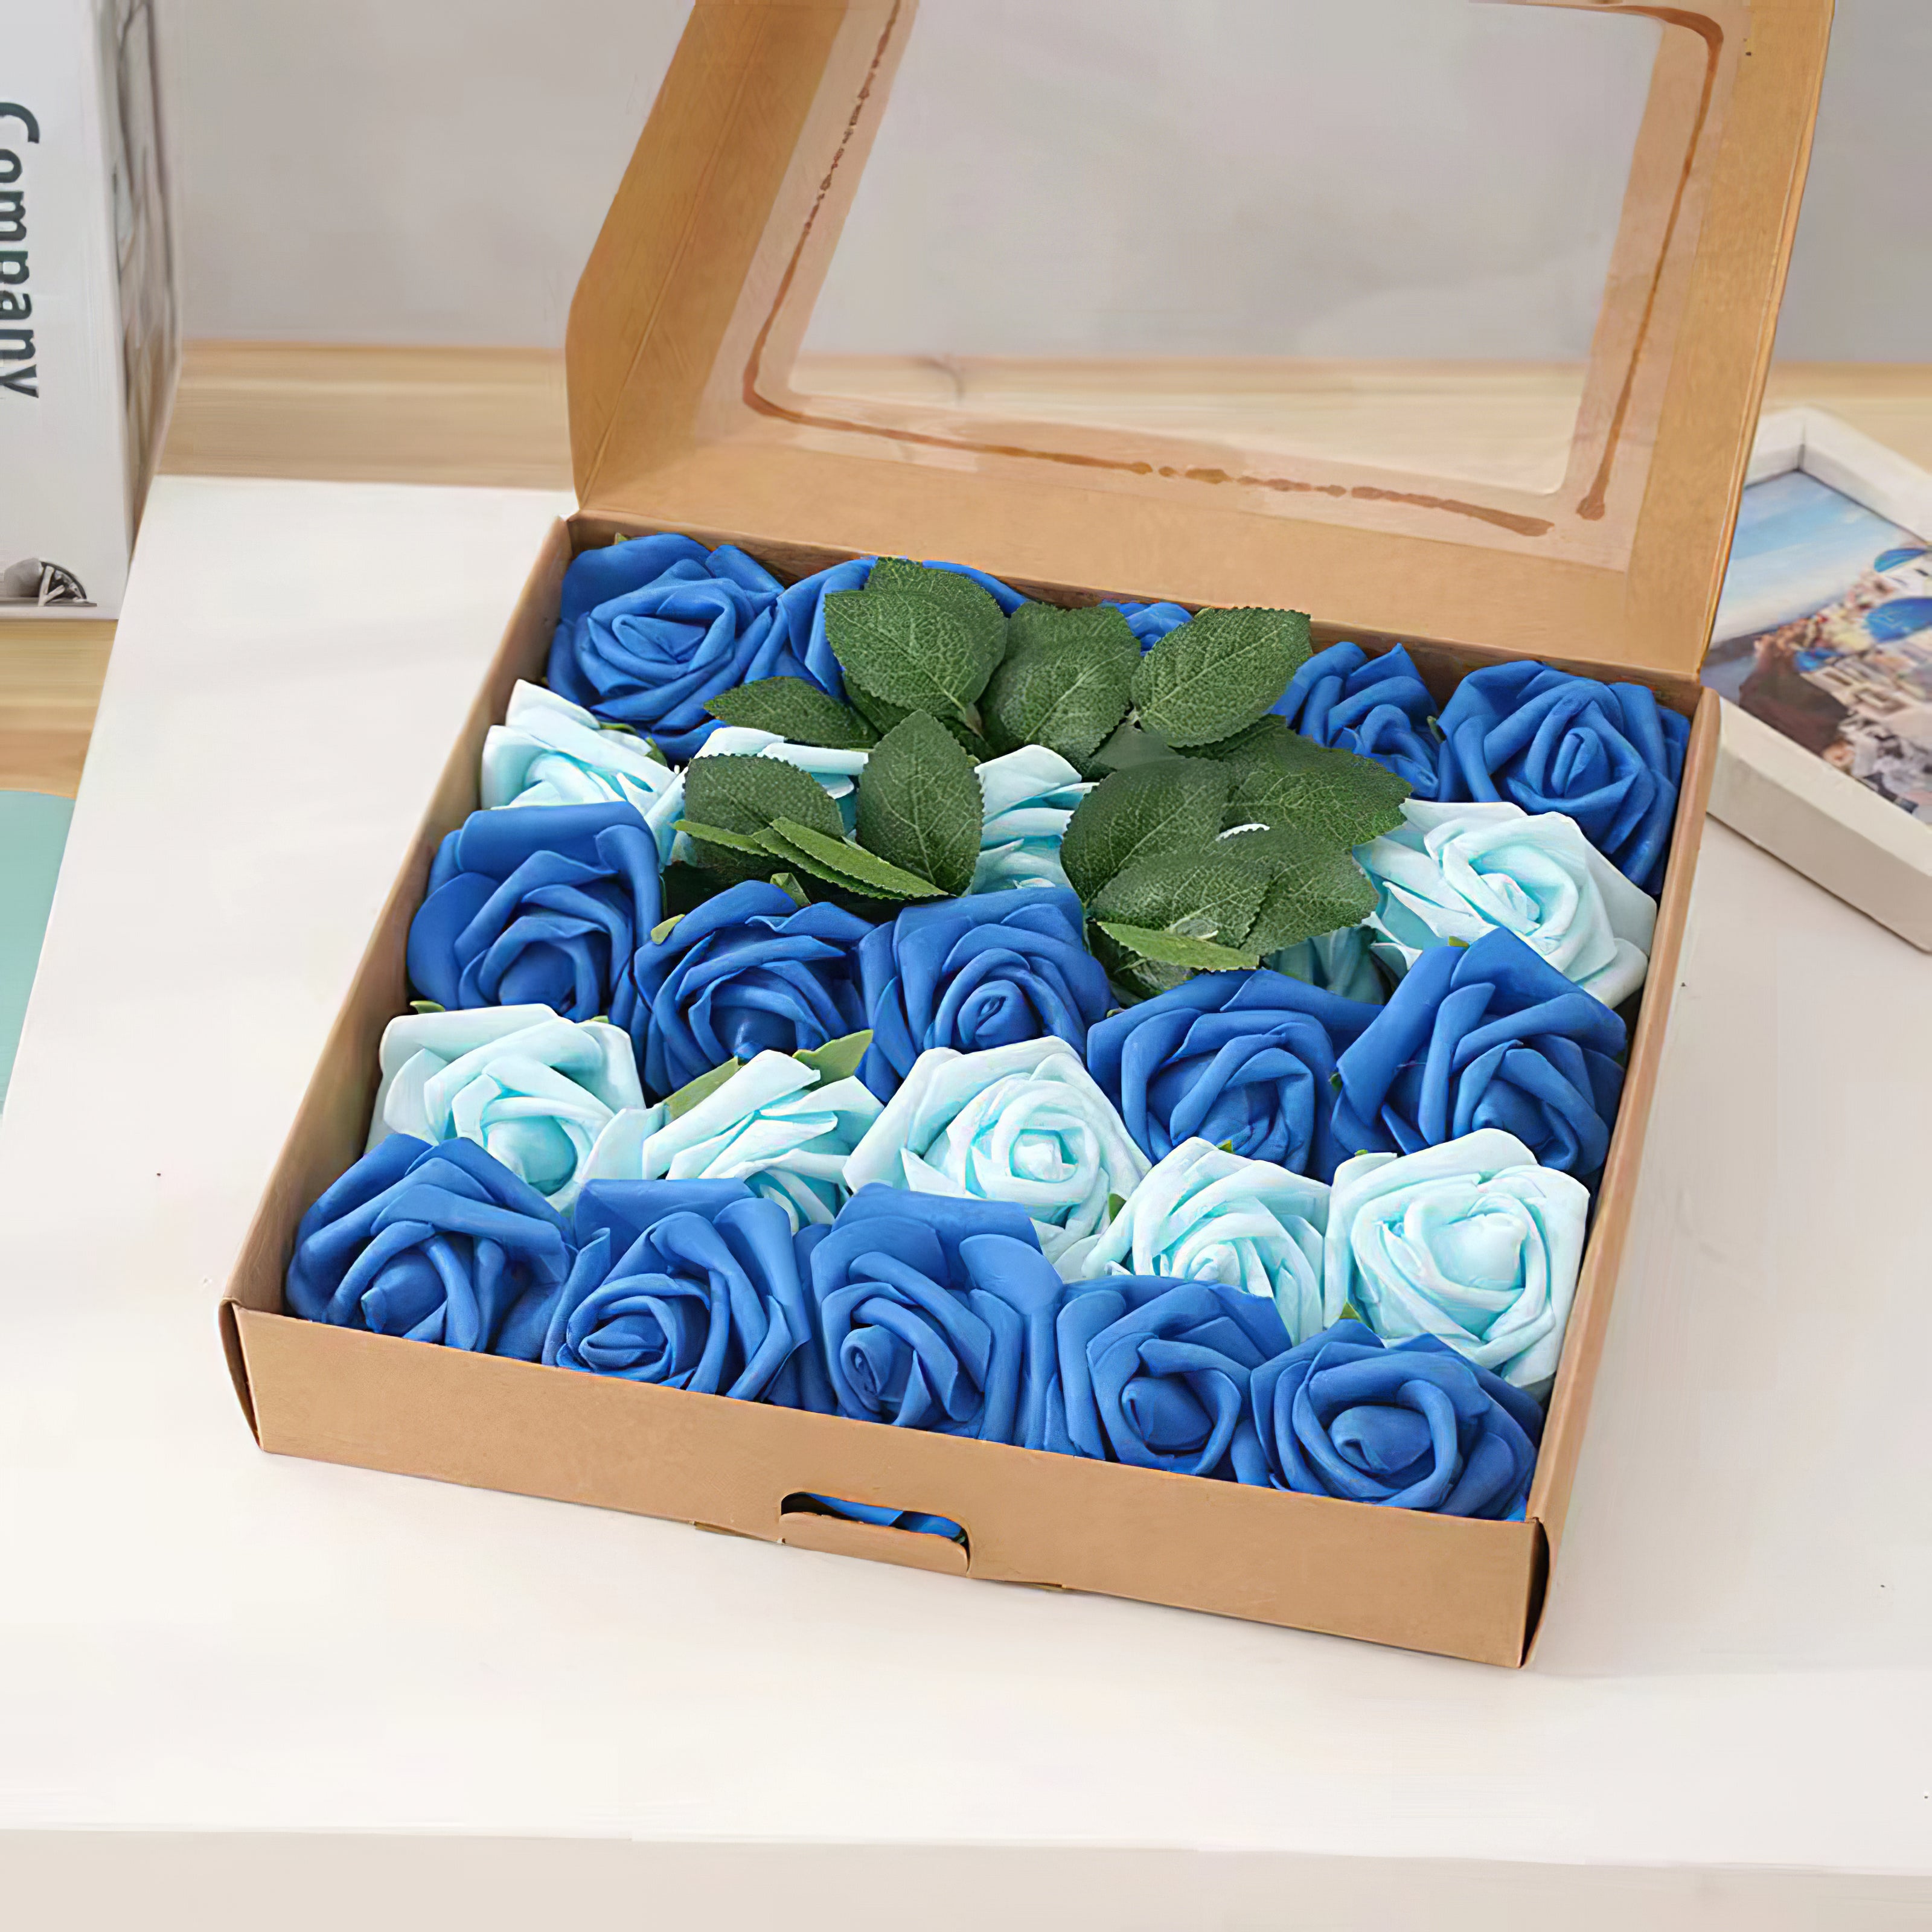 Mixed Color Roses Series Flower Box Silk Flower for Wedding Party Decor Proposal